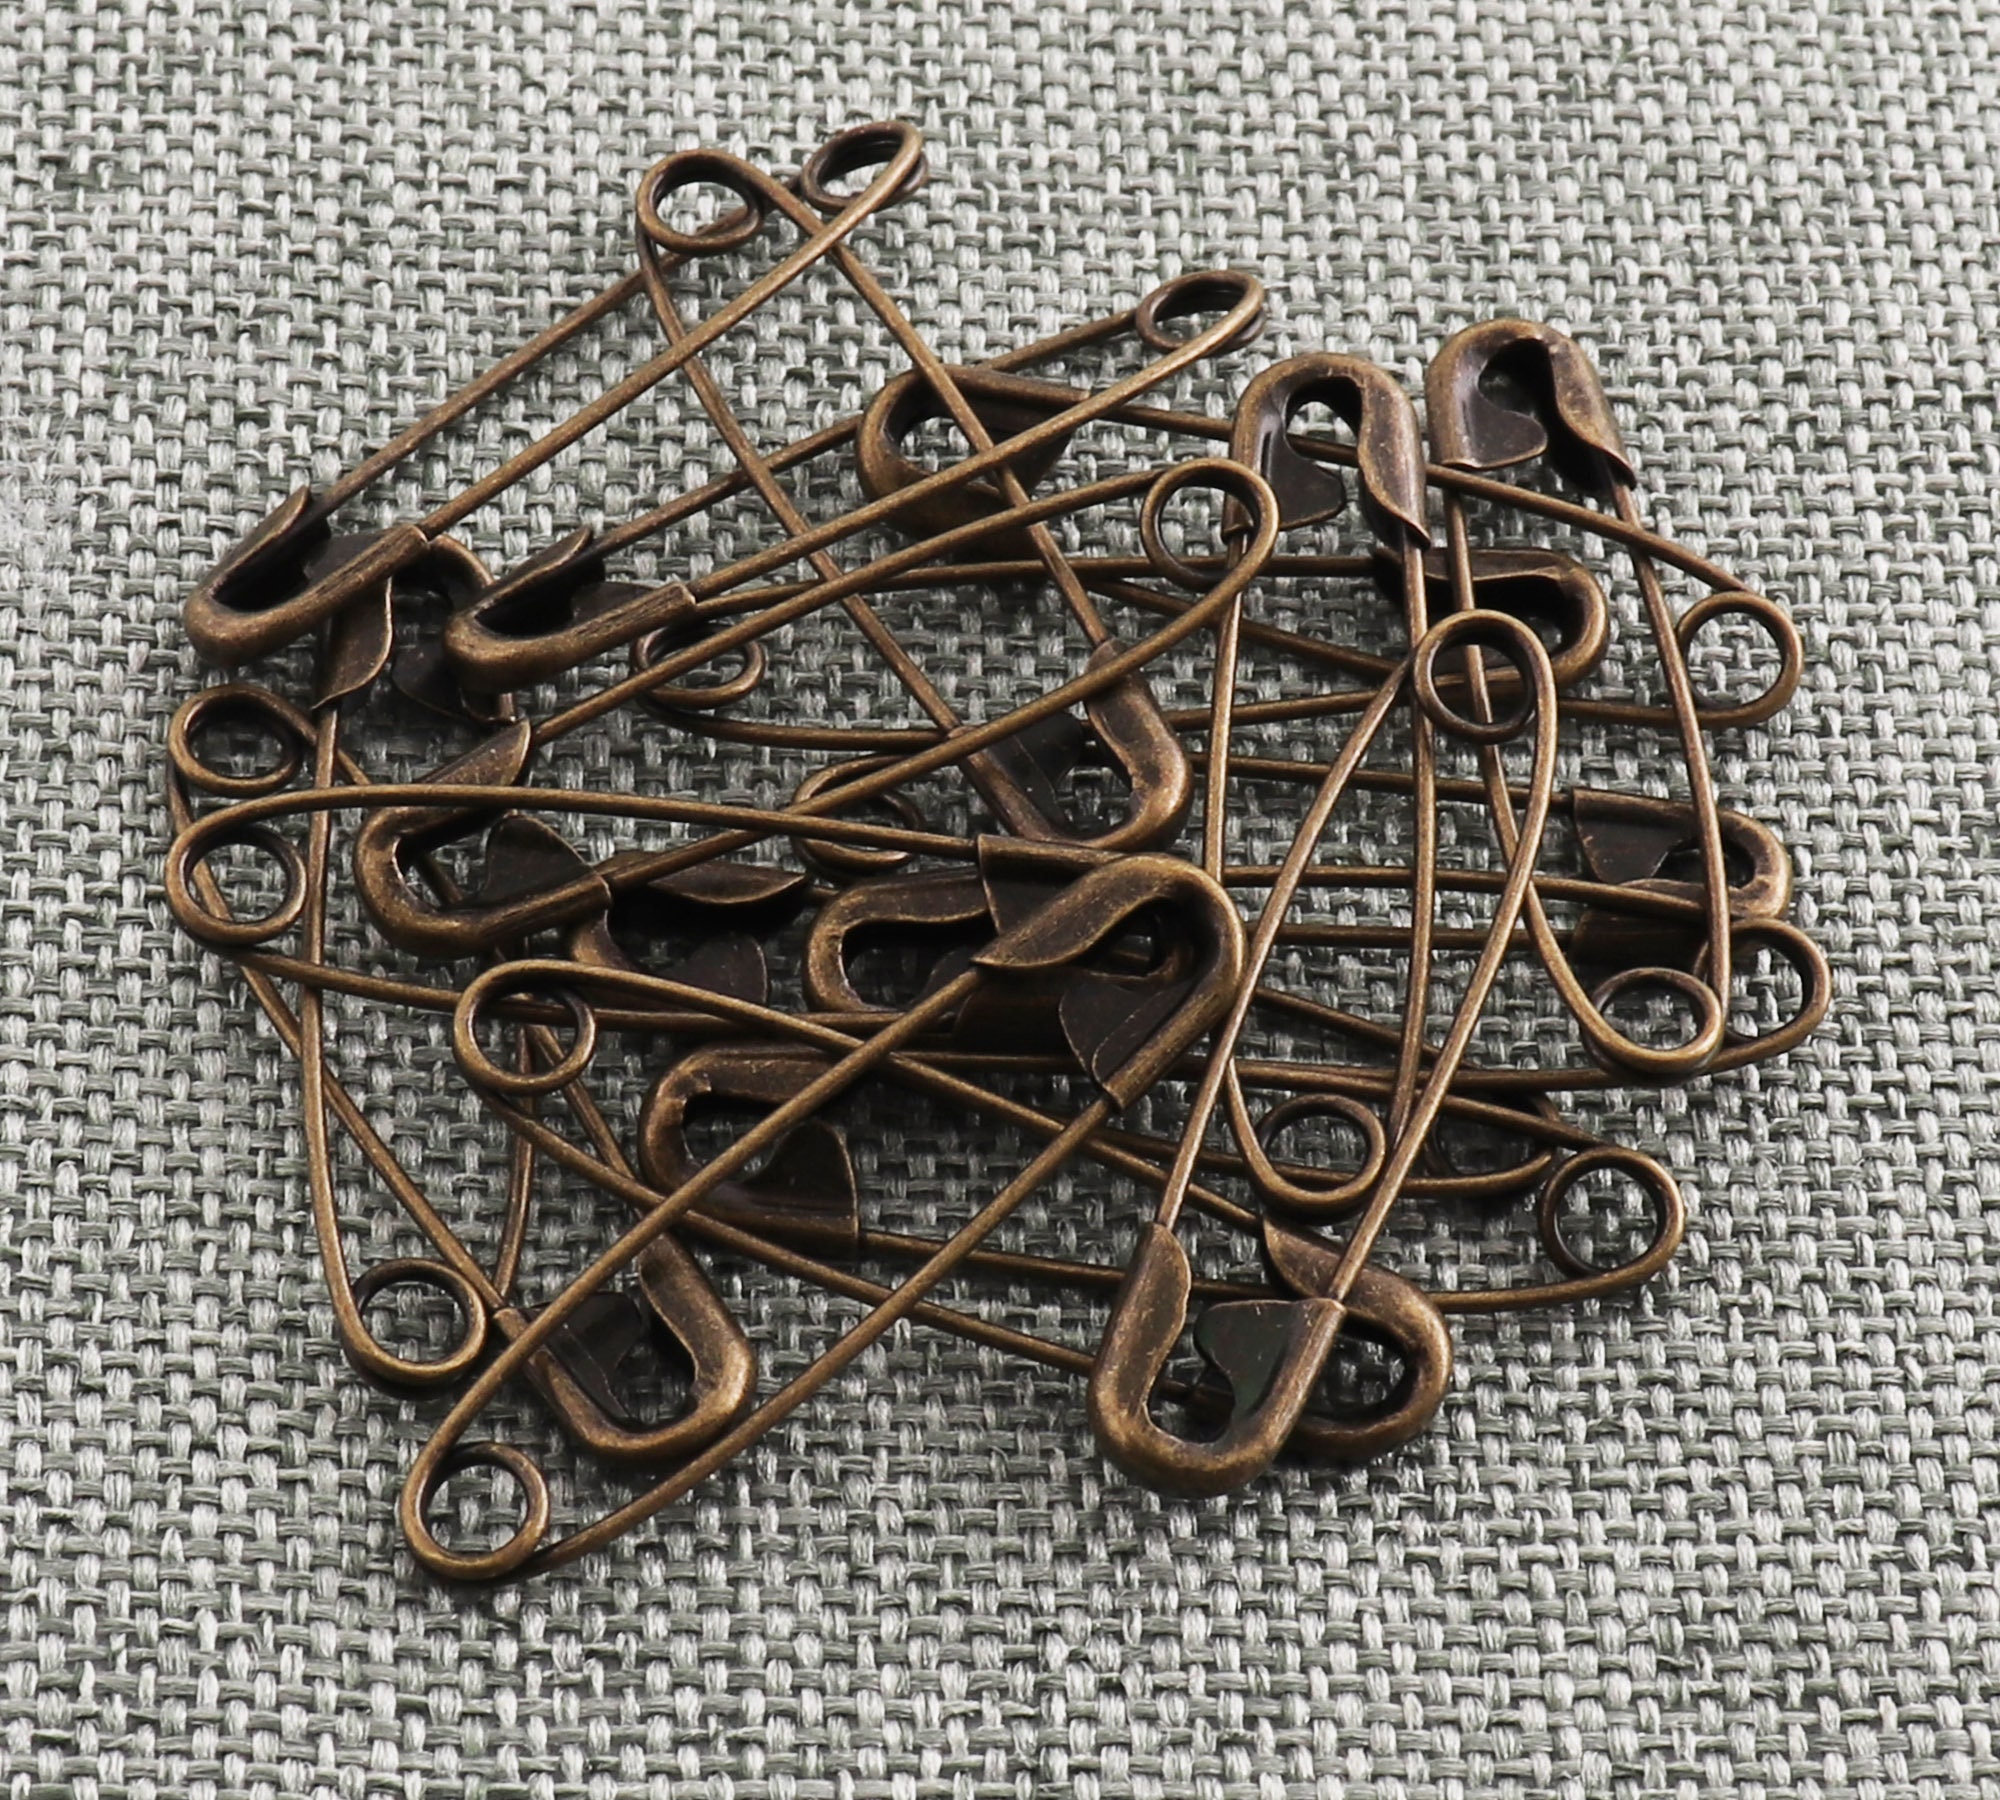 25mm Silver Brooch Pin Backs Brooch Backs Blanks Safety Clasps Pins  Fasteners Craft Jewelry Making Findings DIY Arts and Crafts 10/50/100pcs 